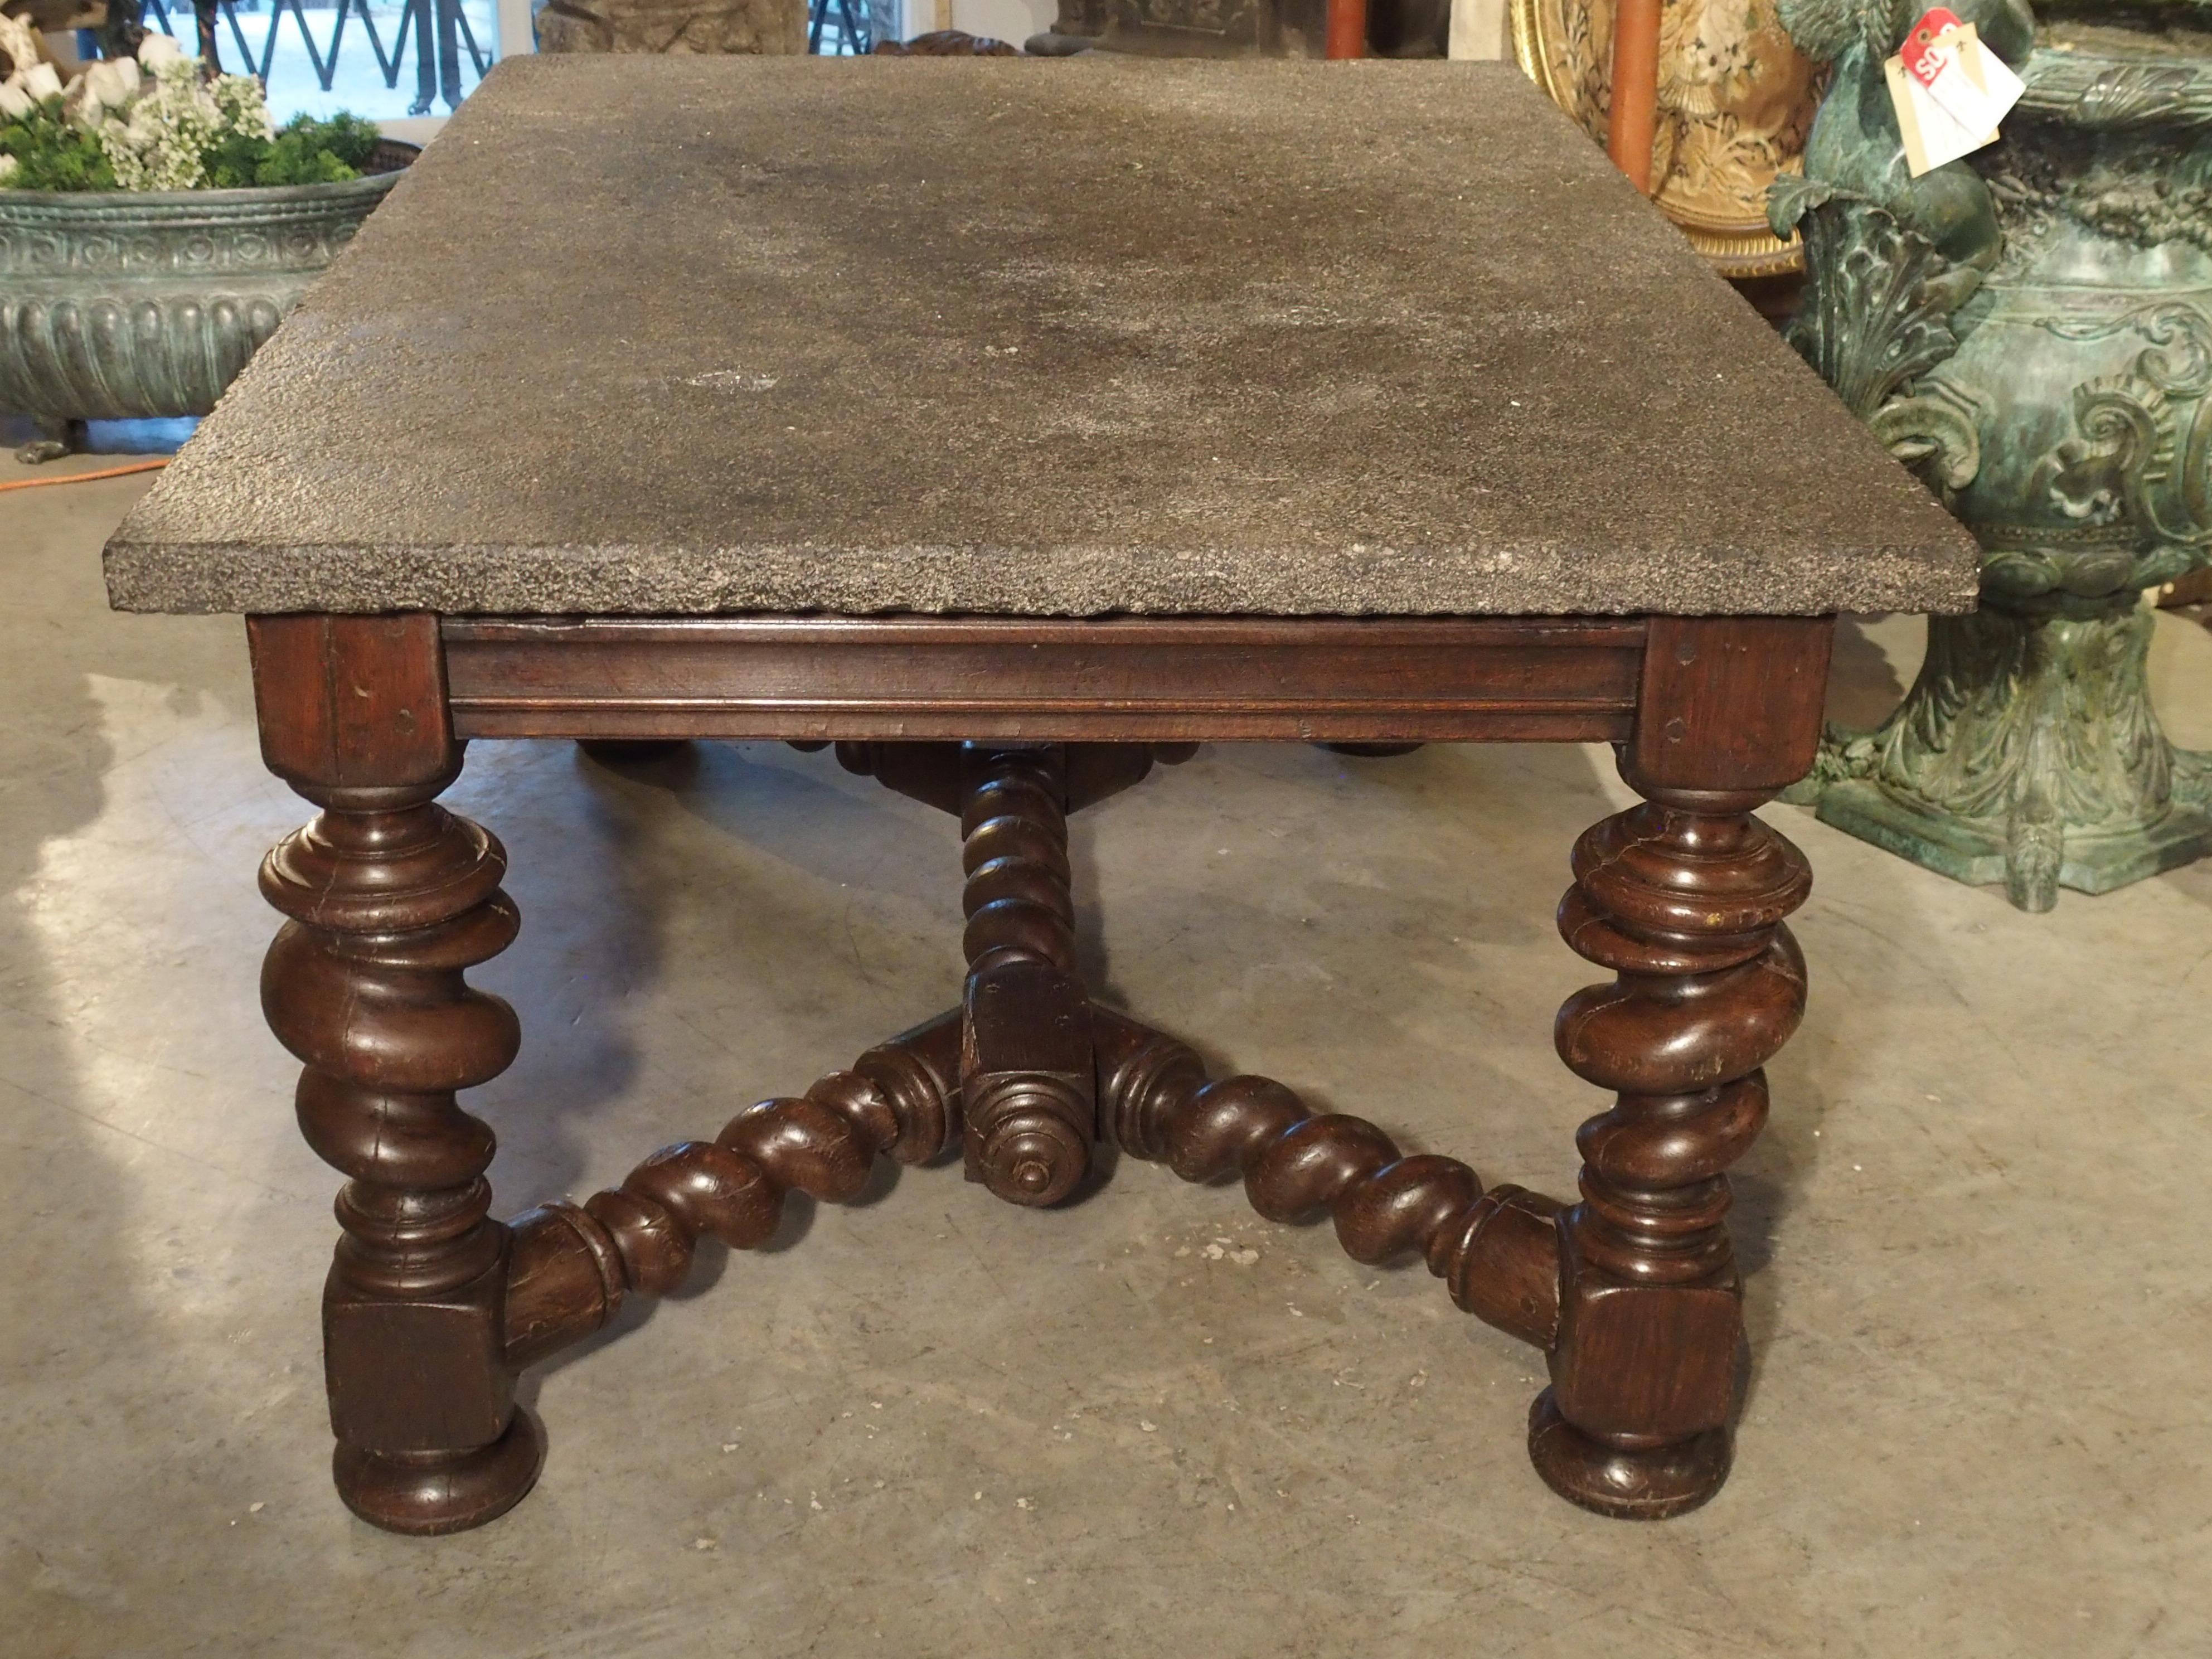 Impressive French Oak Table with Large Turned Legs and Bluestone Top, C. 1850 7